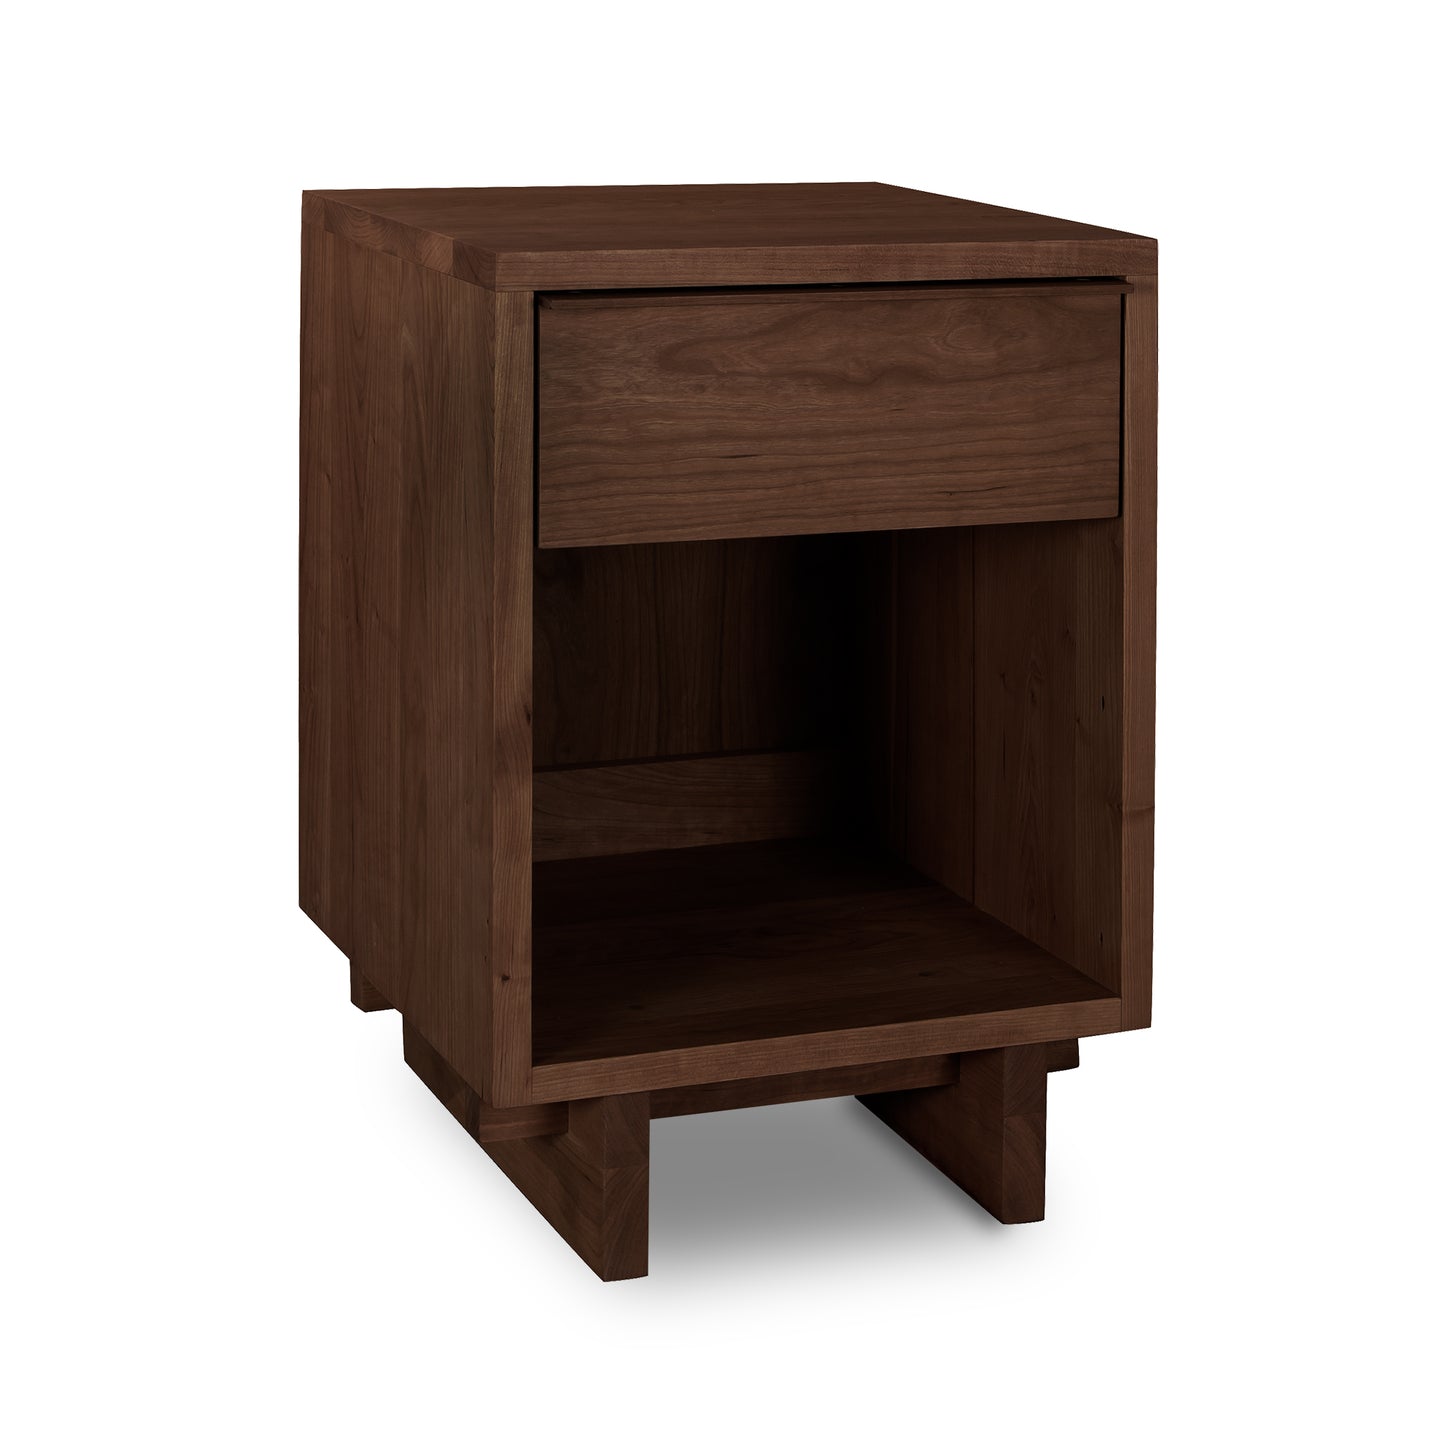 The Vermont Furniture Designs Kipling 1-Drawer Enclosed Shelf Nightstand is perfect for fine furniture lovers who appreciate natural wood.